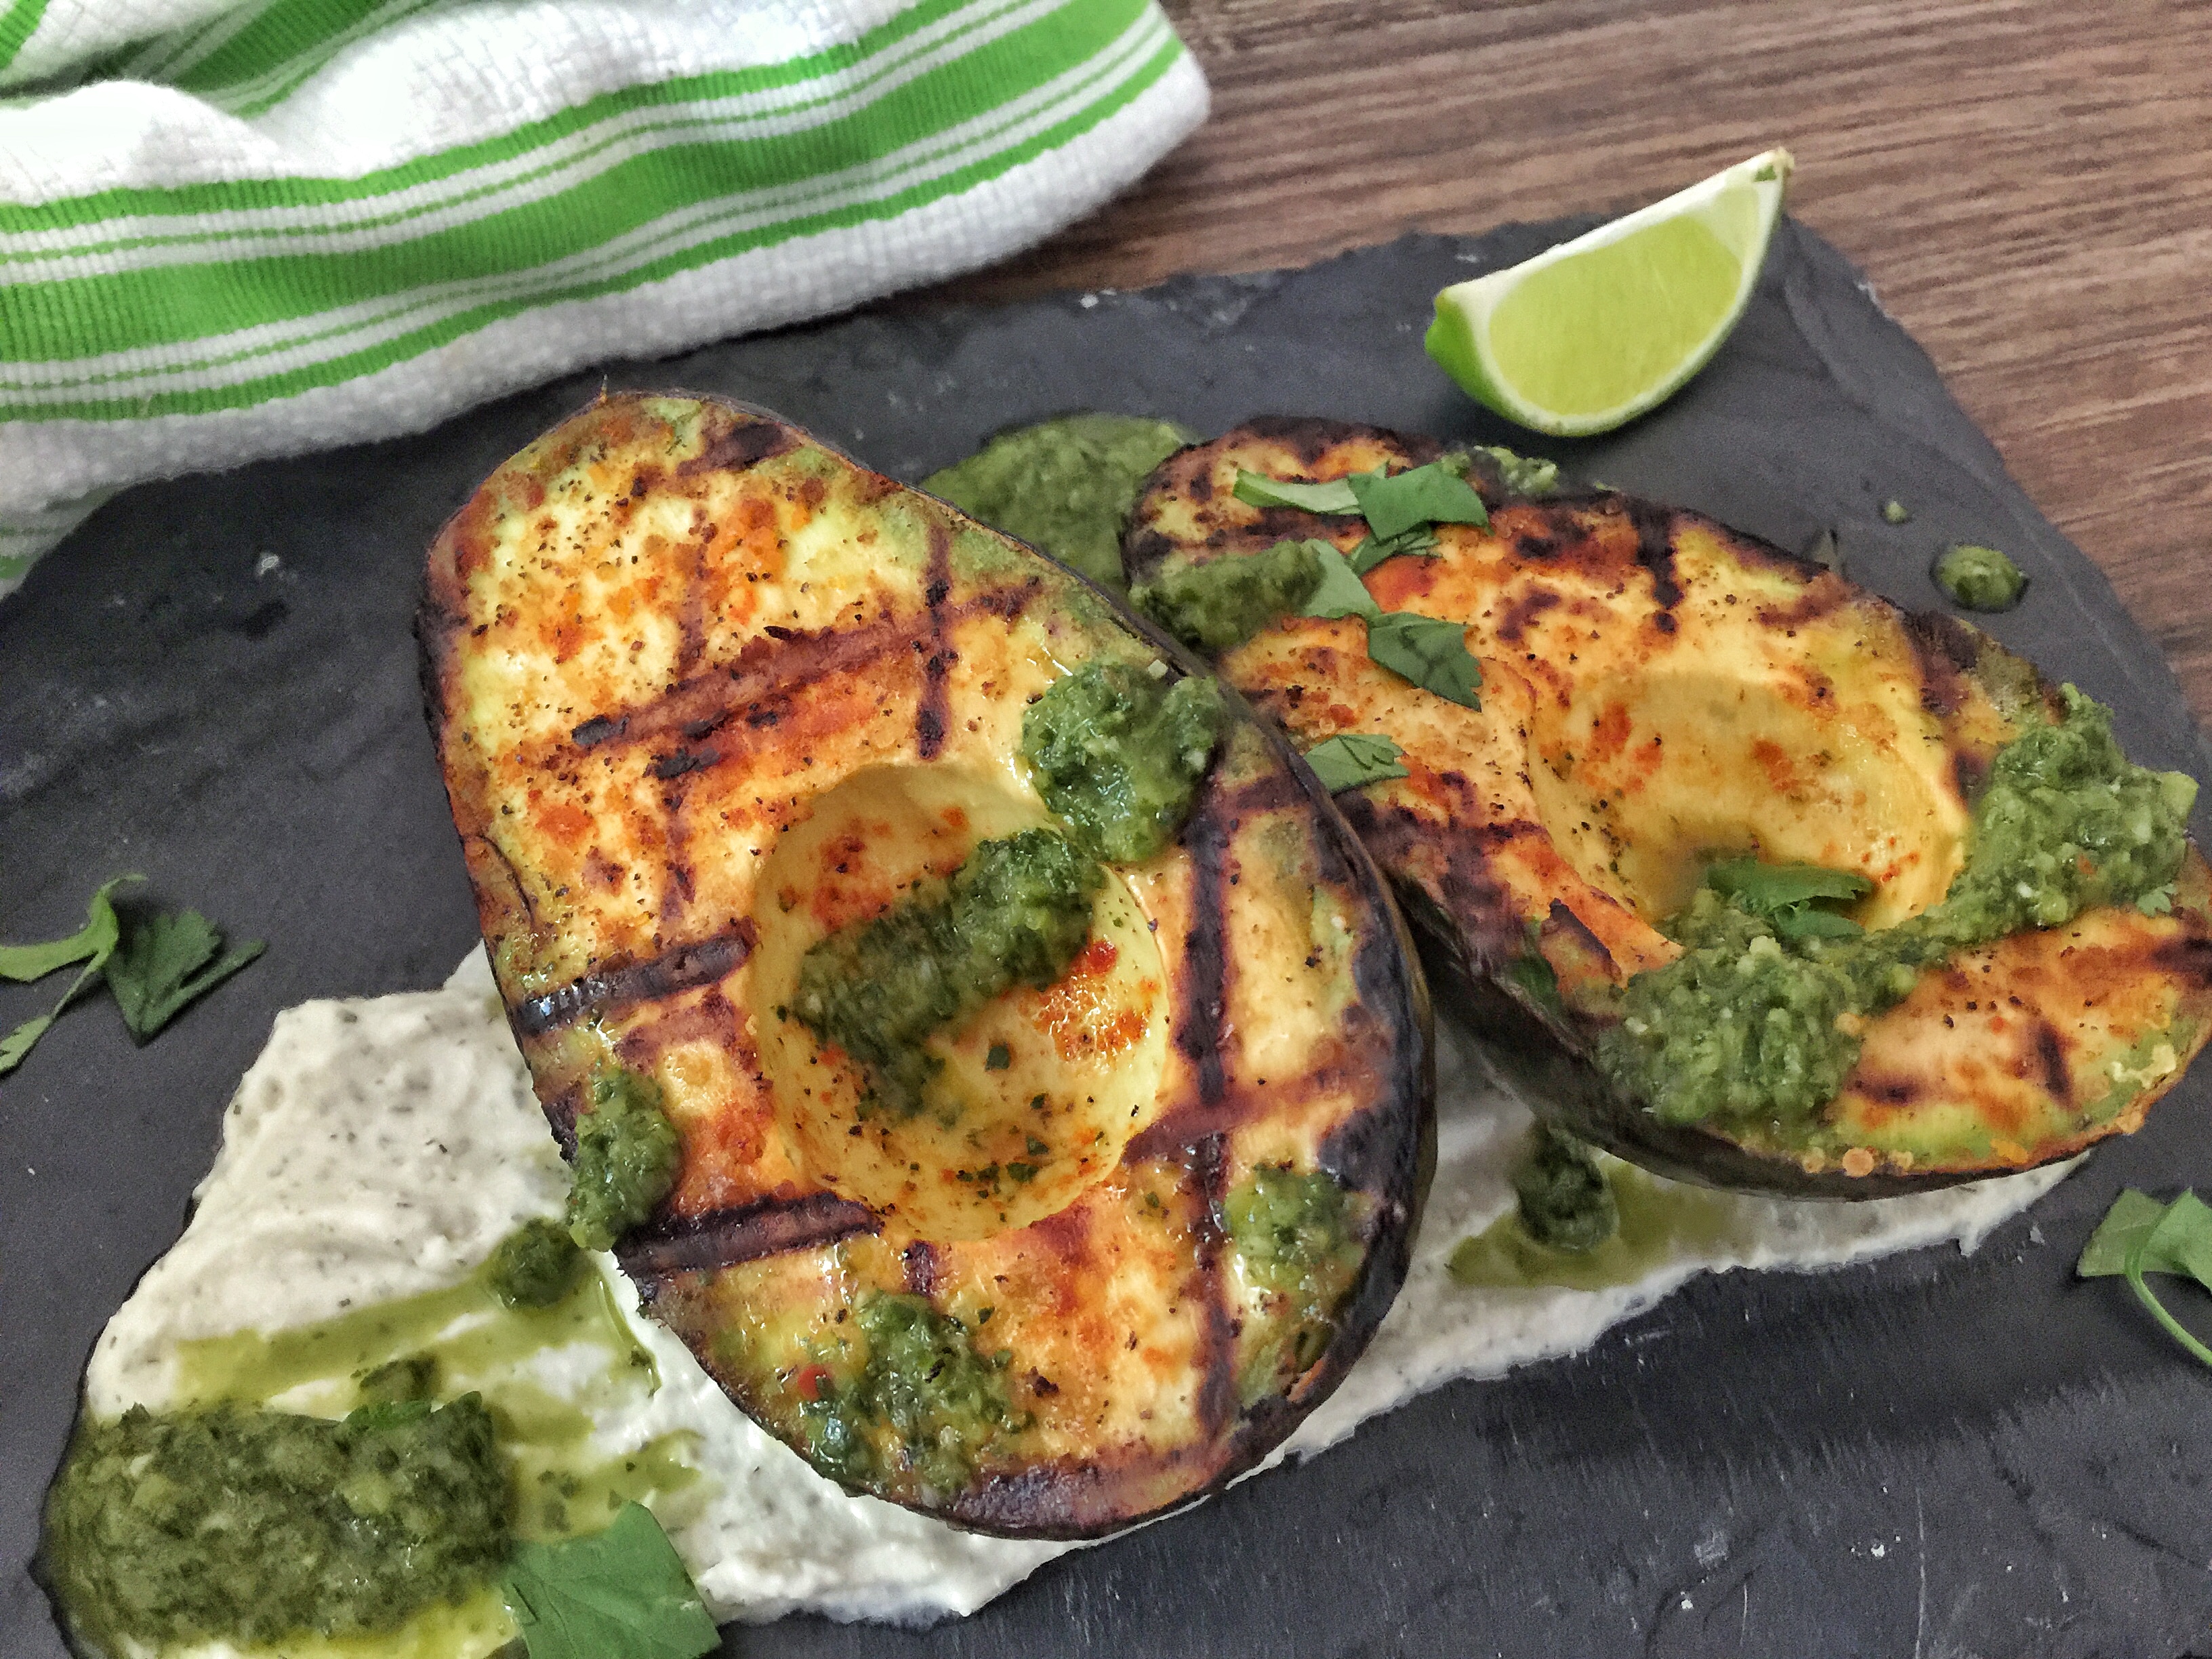 Grilled Avocado with Goat Cheese